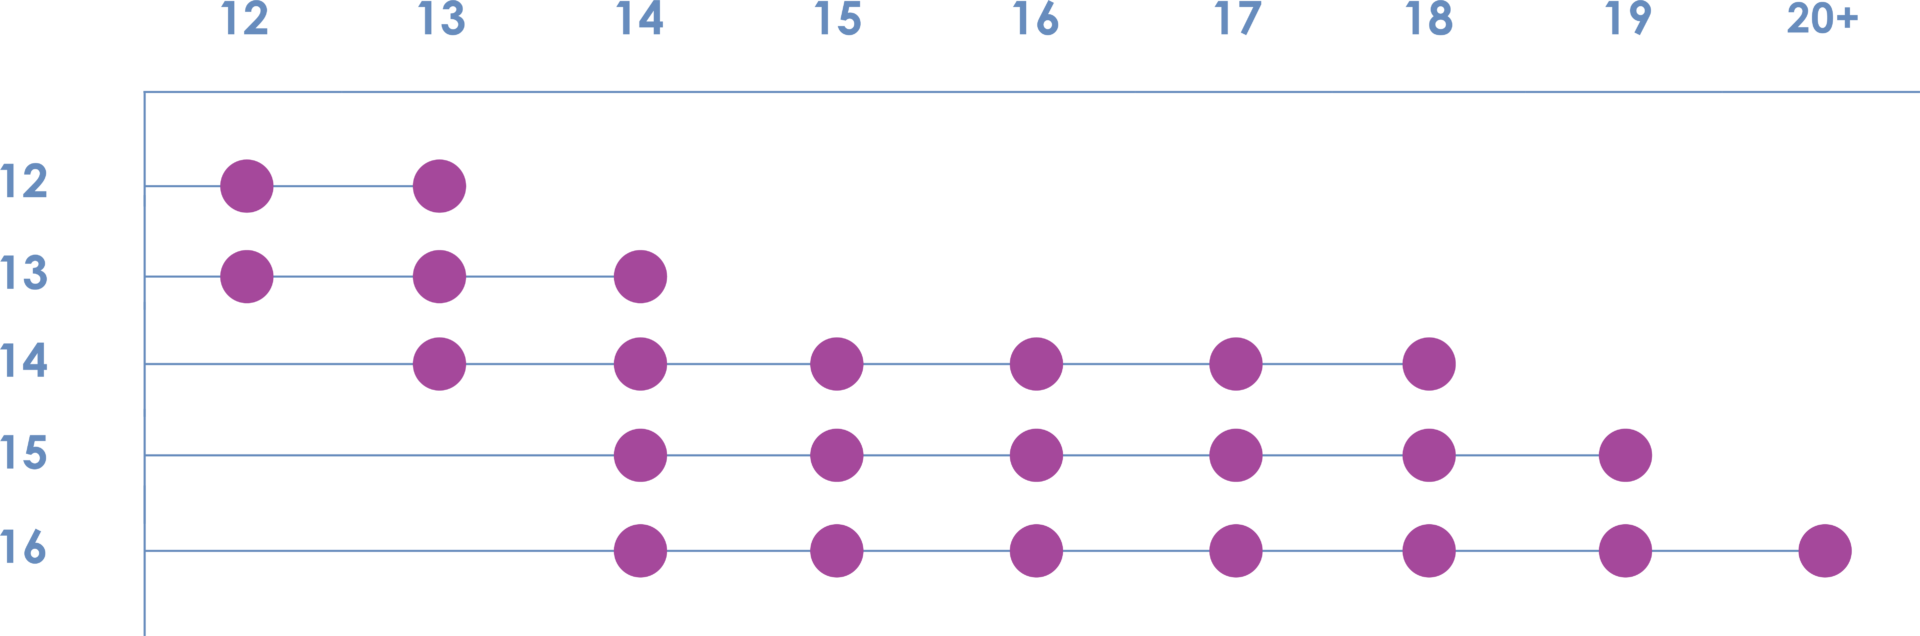 The age of consent in Canada is displayed as a chart to highlight the close in age peer group exemptions for ages 12-16